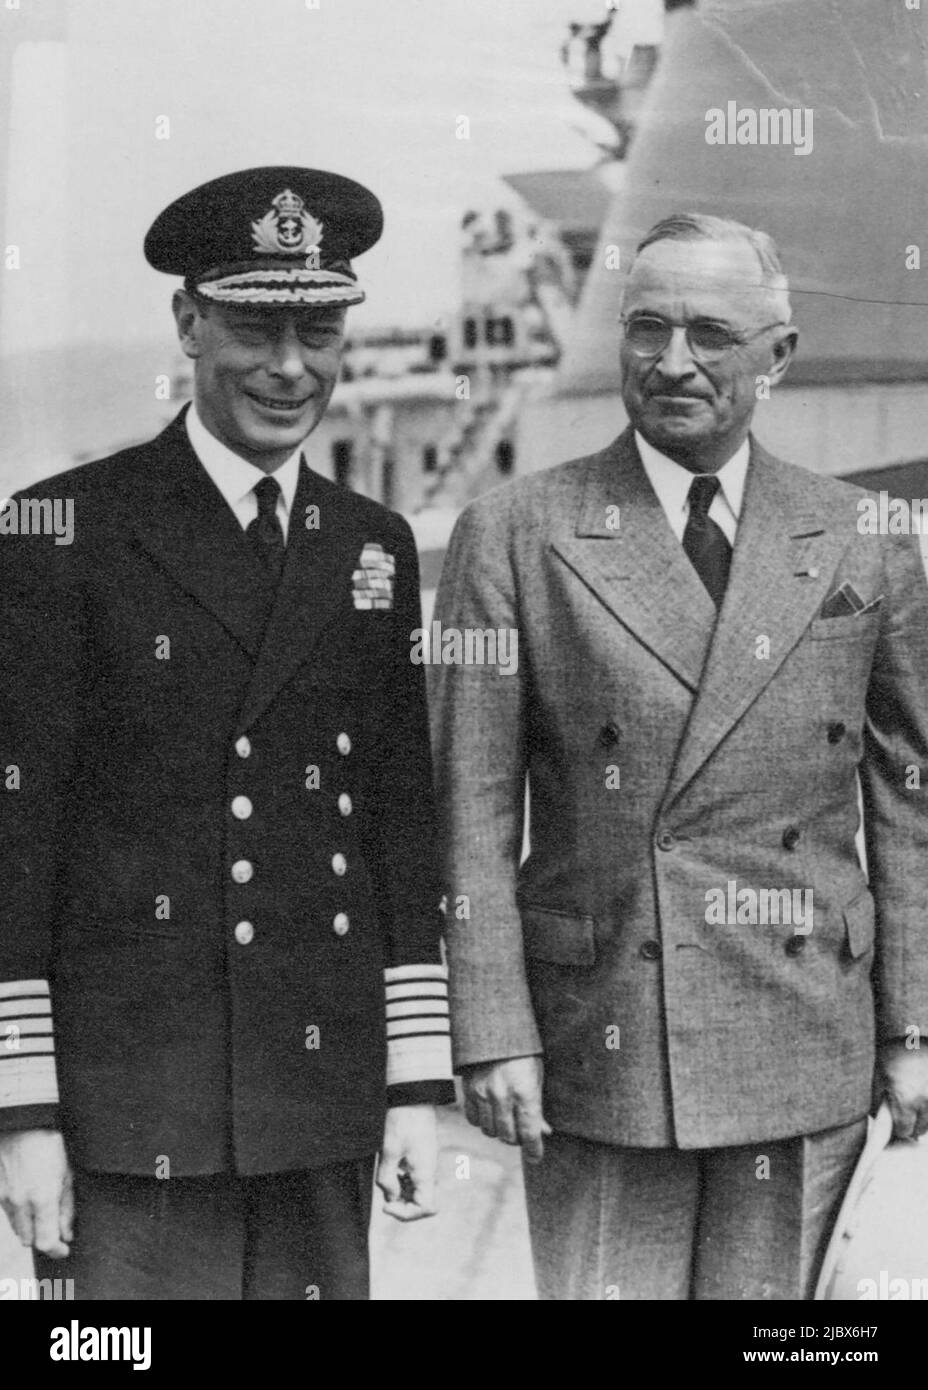 President Truman Received By The King in Plymouth Sound. Return Visit to American Warship: The King and President Truman aboard H.M.S. 'Renown'. The King received President Truman on board the battle cruiser H.M.S.'Renown' after the President had flown to England from Potsdam. His Majesty then paid a visit to the U.S. cruiser 'Augusta', visiting the President before he sailed for America. Earlier in the day after his plane landed near Plymouth, Mr. Truman saw the historic Barbican Stone and Mayflower Steps, where the Pilgrim Fathers set sail for New England. August 20, 1945. (Photo by London N Stock Photo